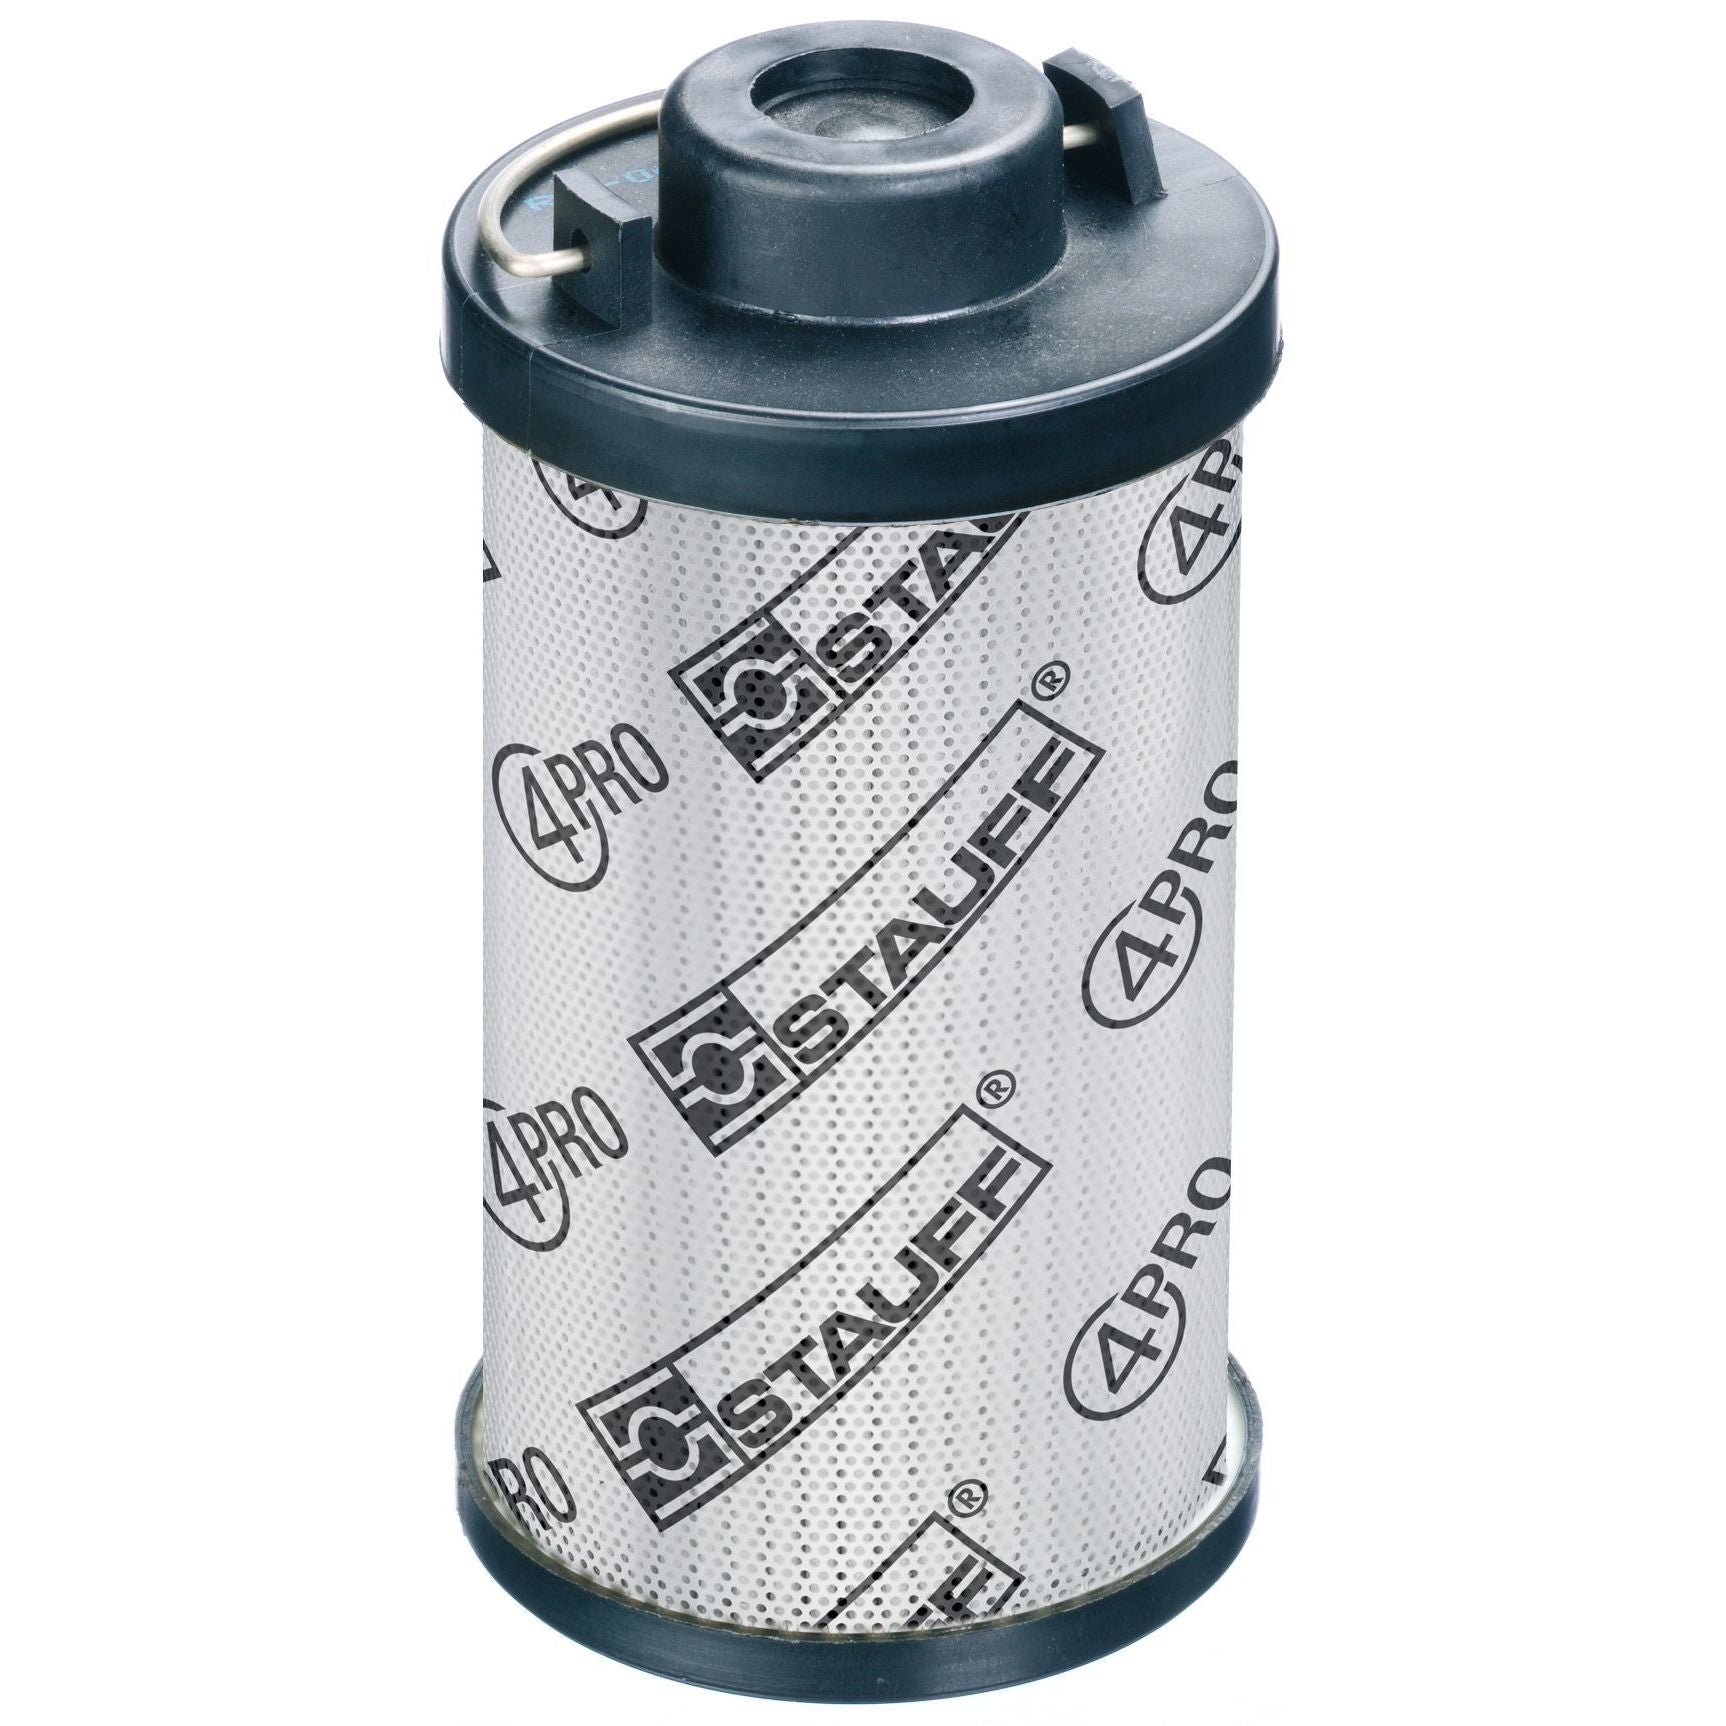 RE-030-G-10-B-B3/4 : Stauff RF-030 Series Filter Element, 10 Micron, Synthetic, 363psi Collapse Differential, Buna